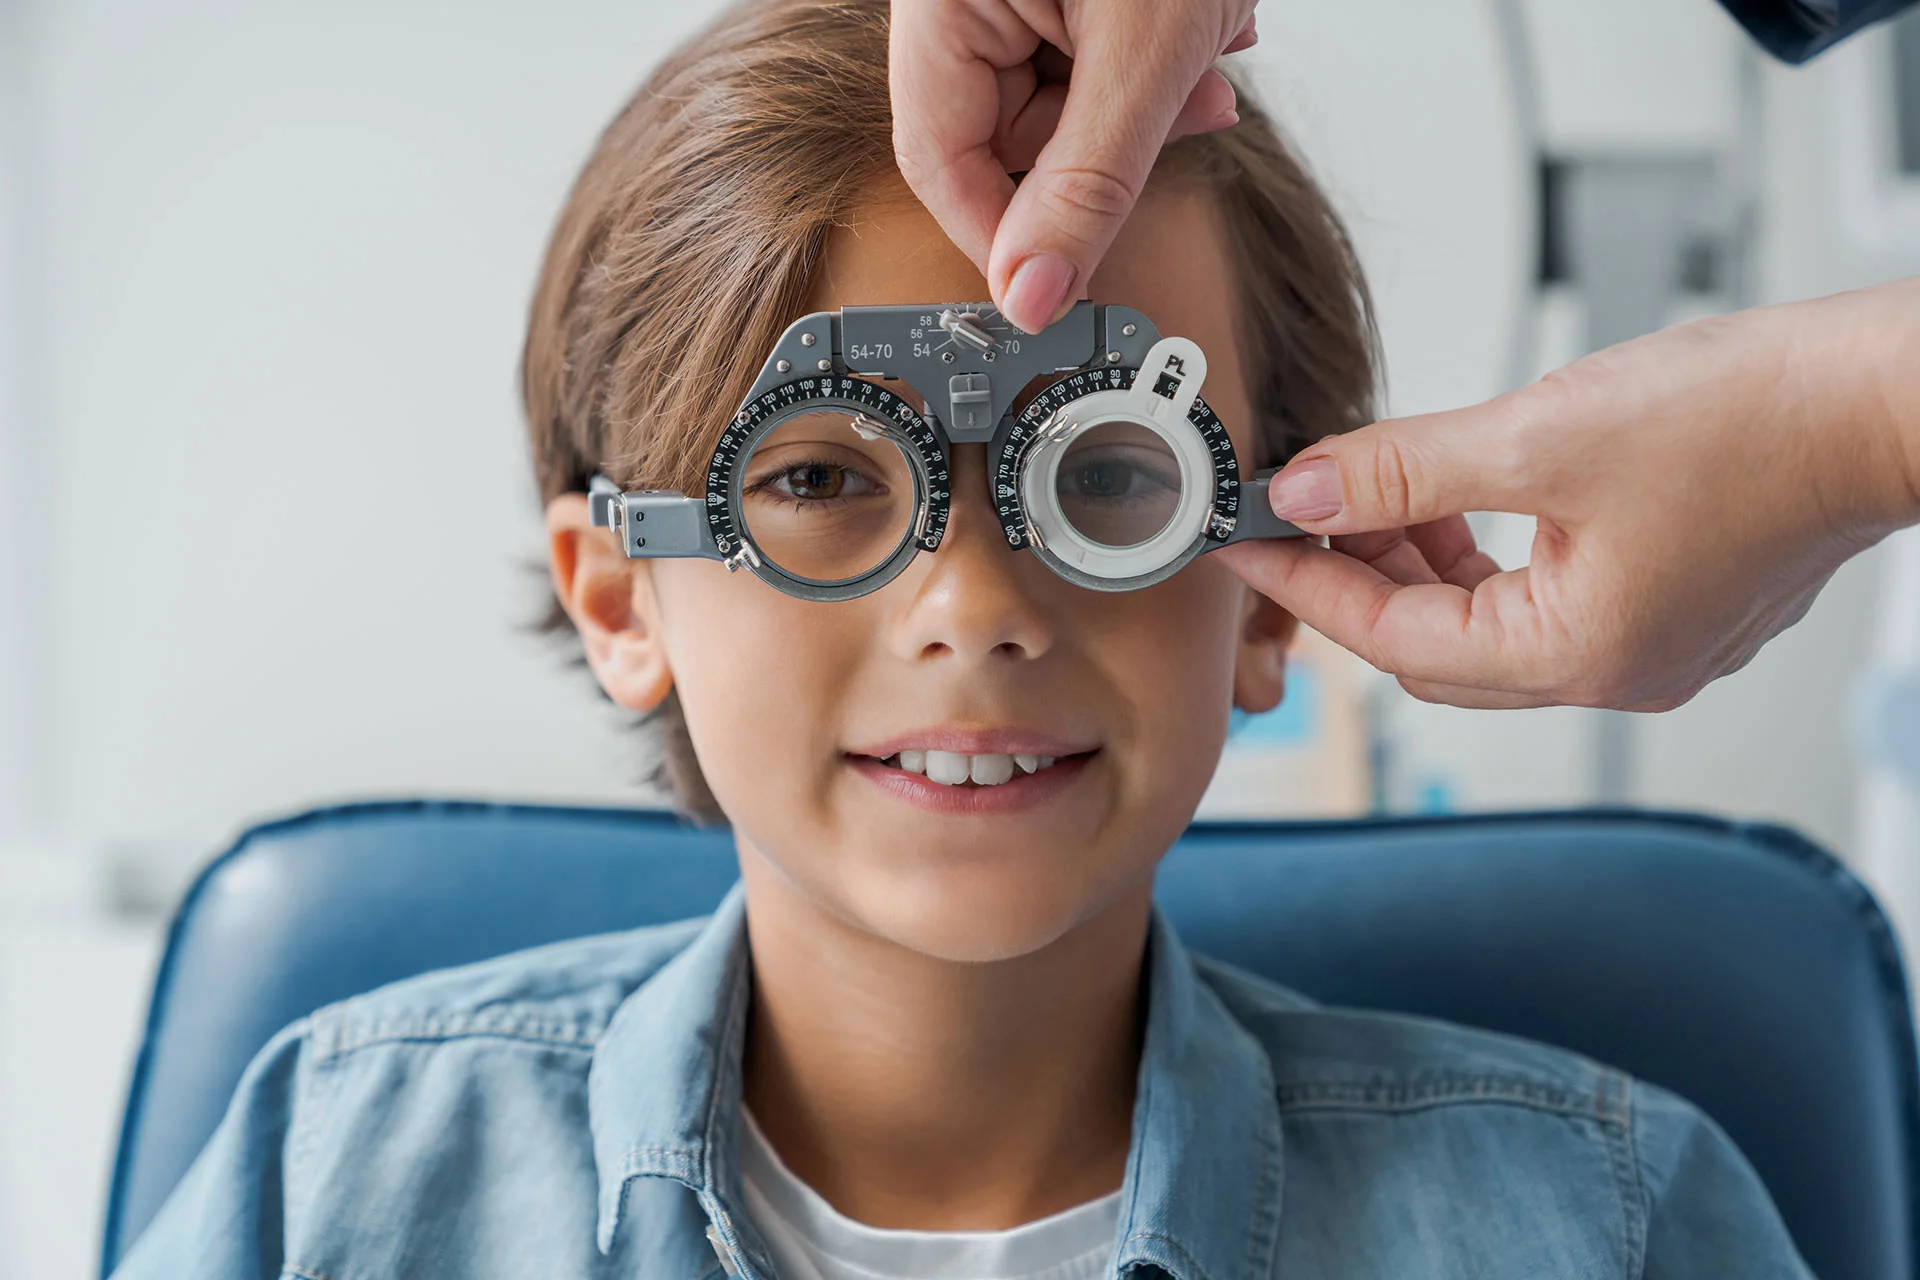 Experience What Sets Us Apart With A Personalized Eye Exam From Our Highly Experienced Eye Doctors.